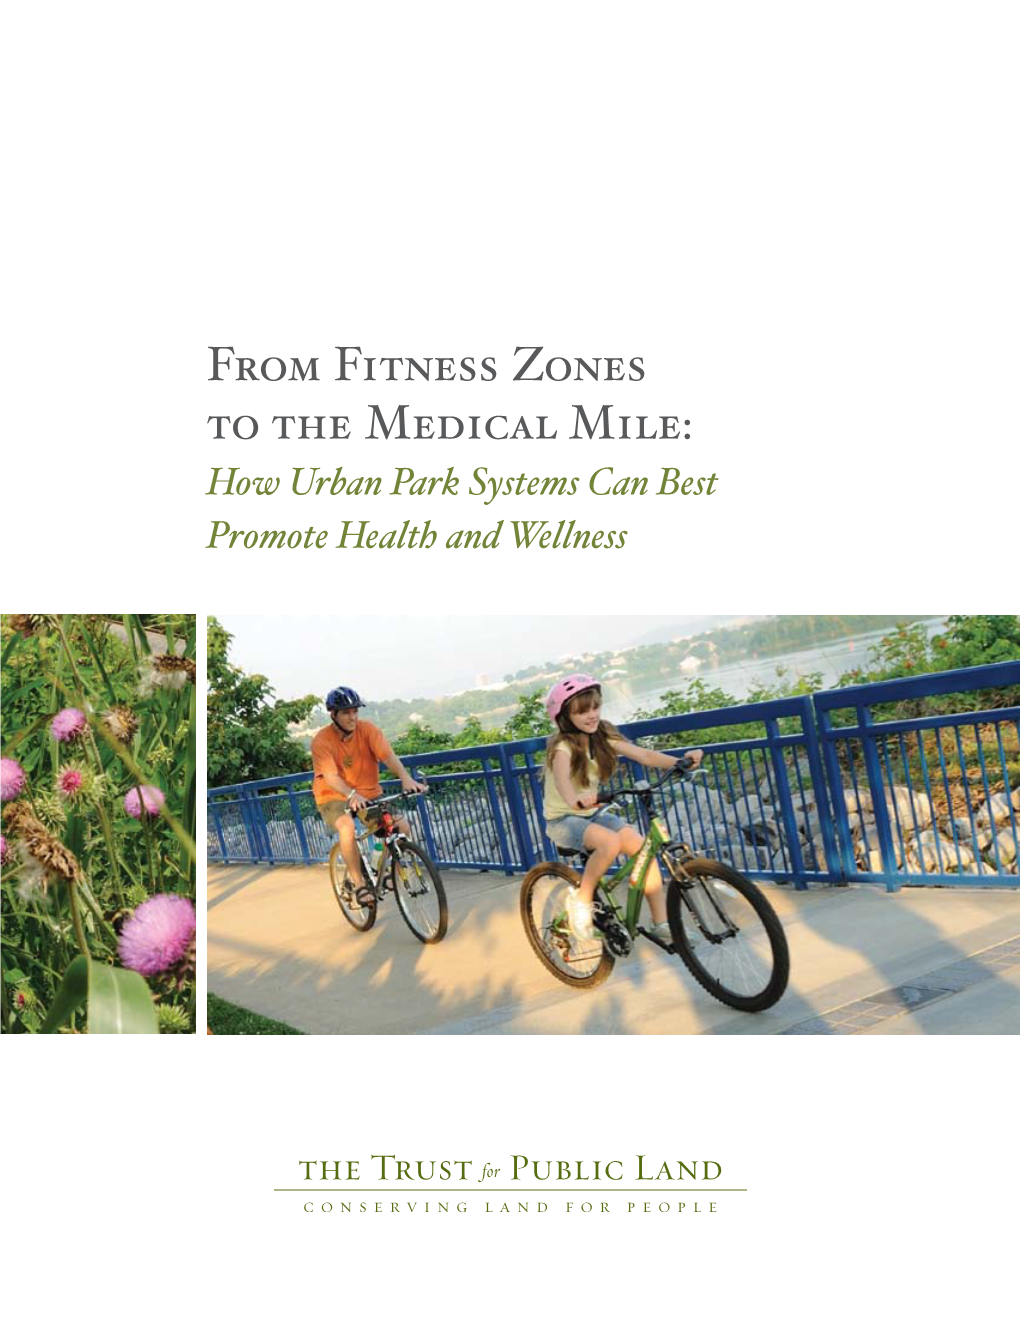 From Fitness Zones to the Medical Mile